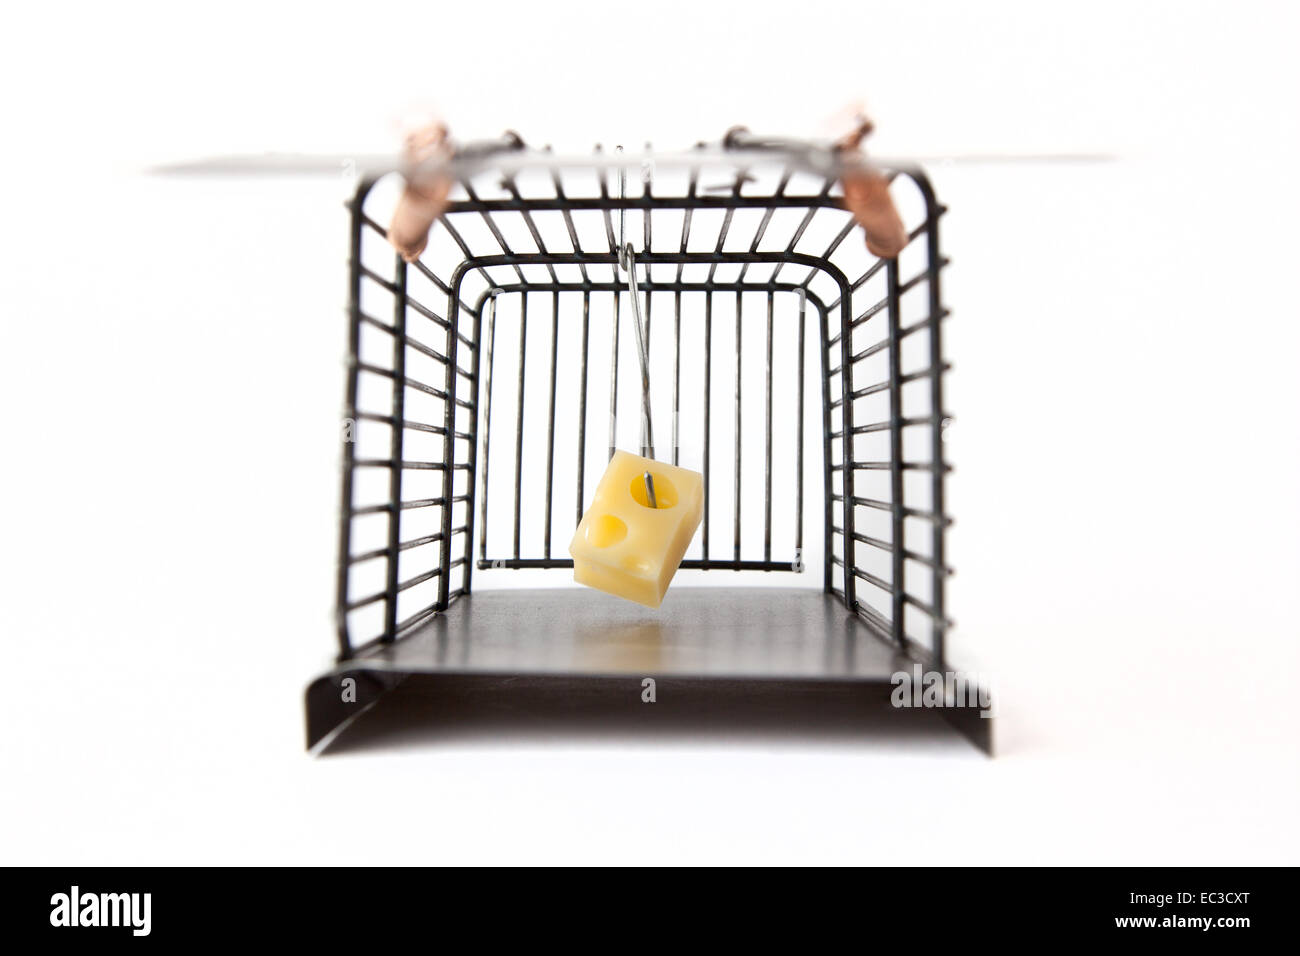 Mousetrap with cheese. Stock Photo